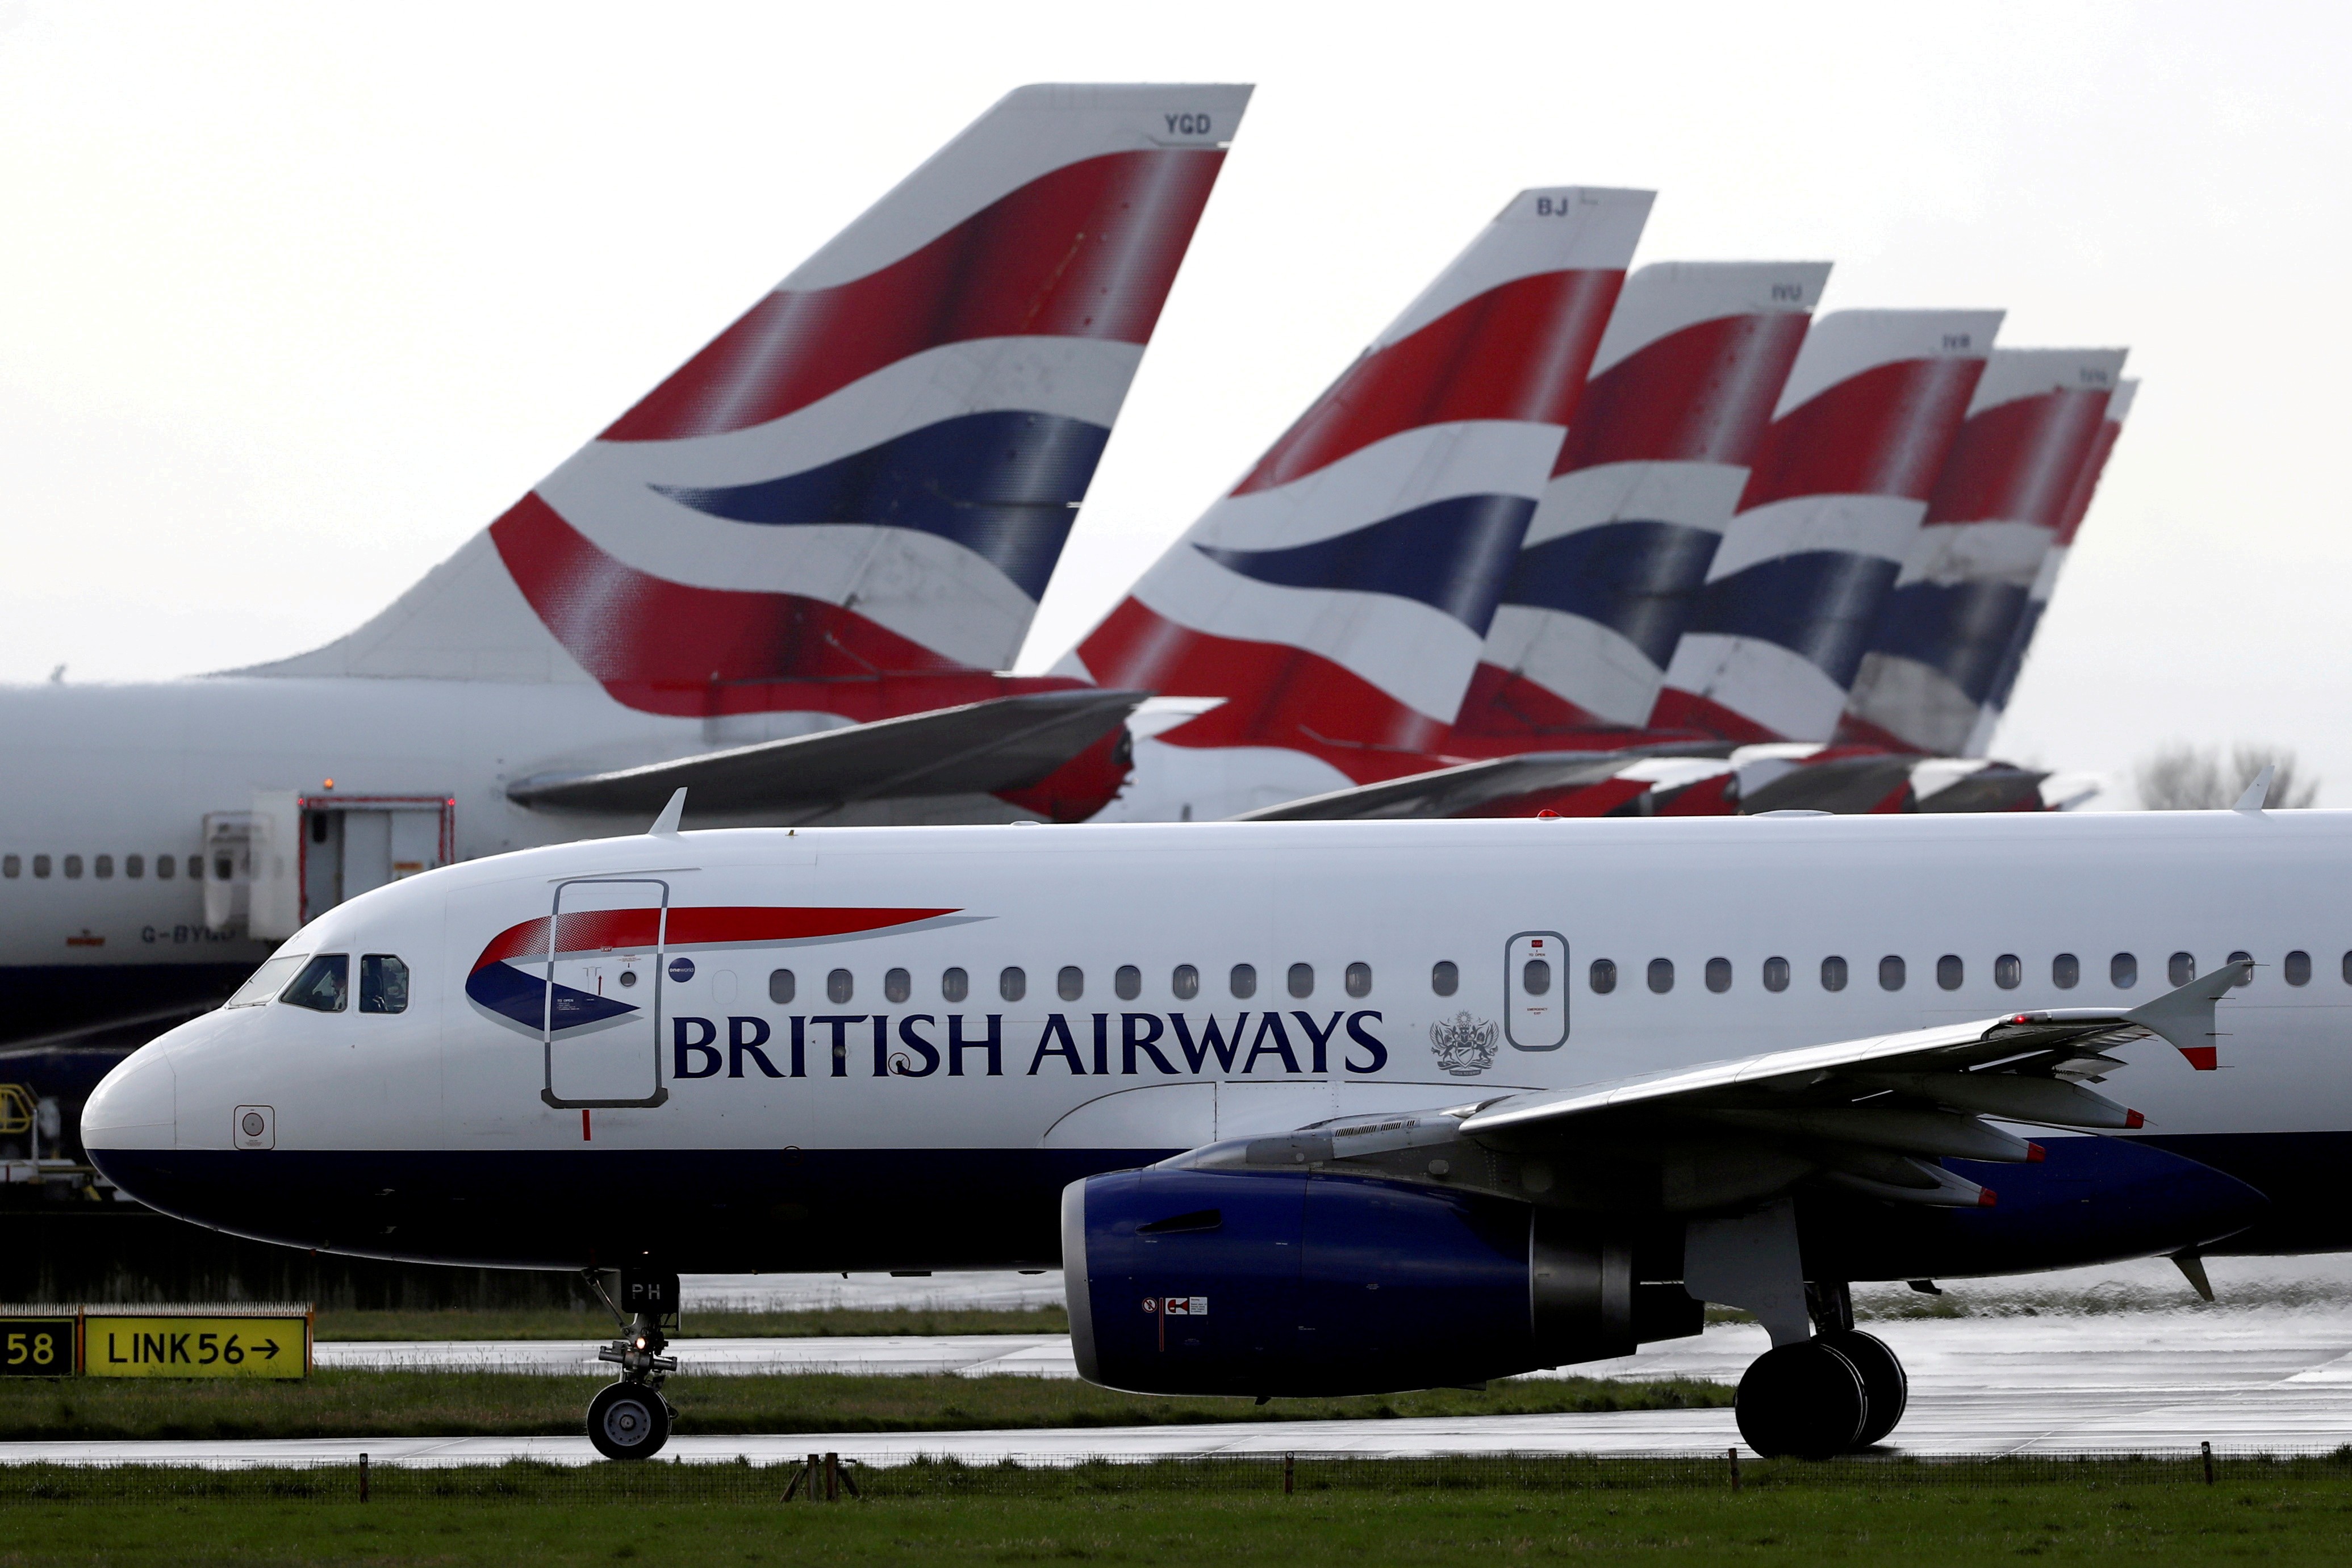 A British Airways plane taxis past tail fins of parked aircraft at Heathrow Airport in London